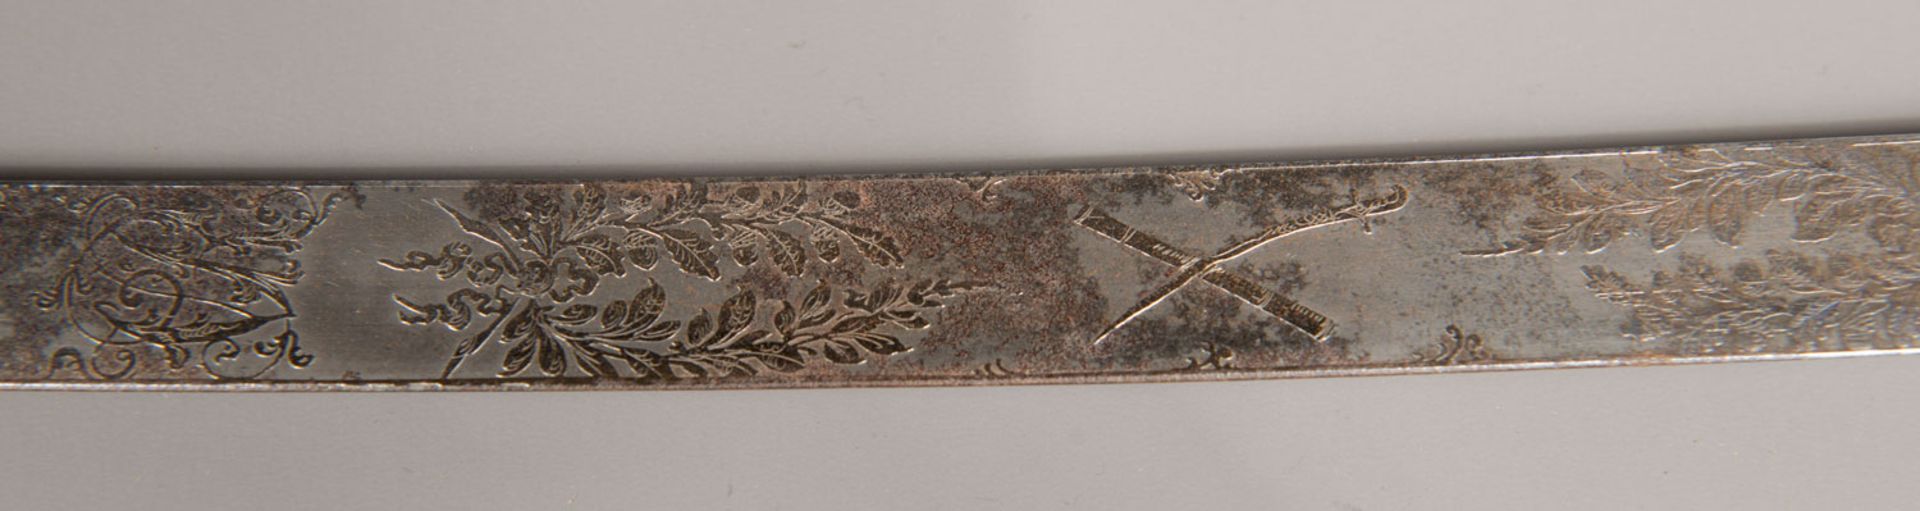 A Binnie and Mason officer sword - Image 3 of 4